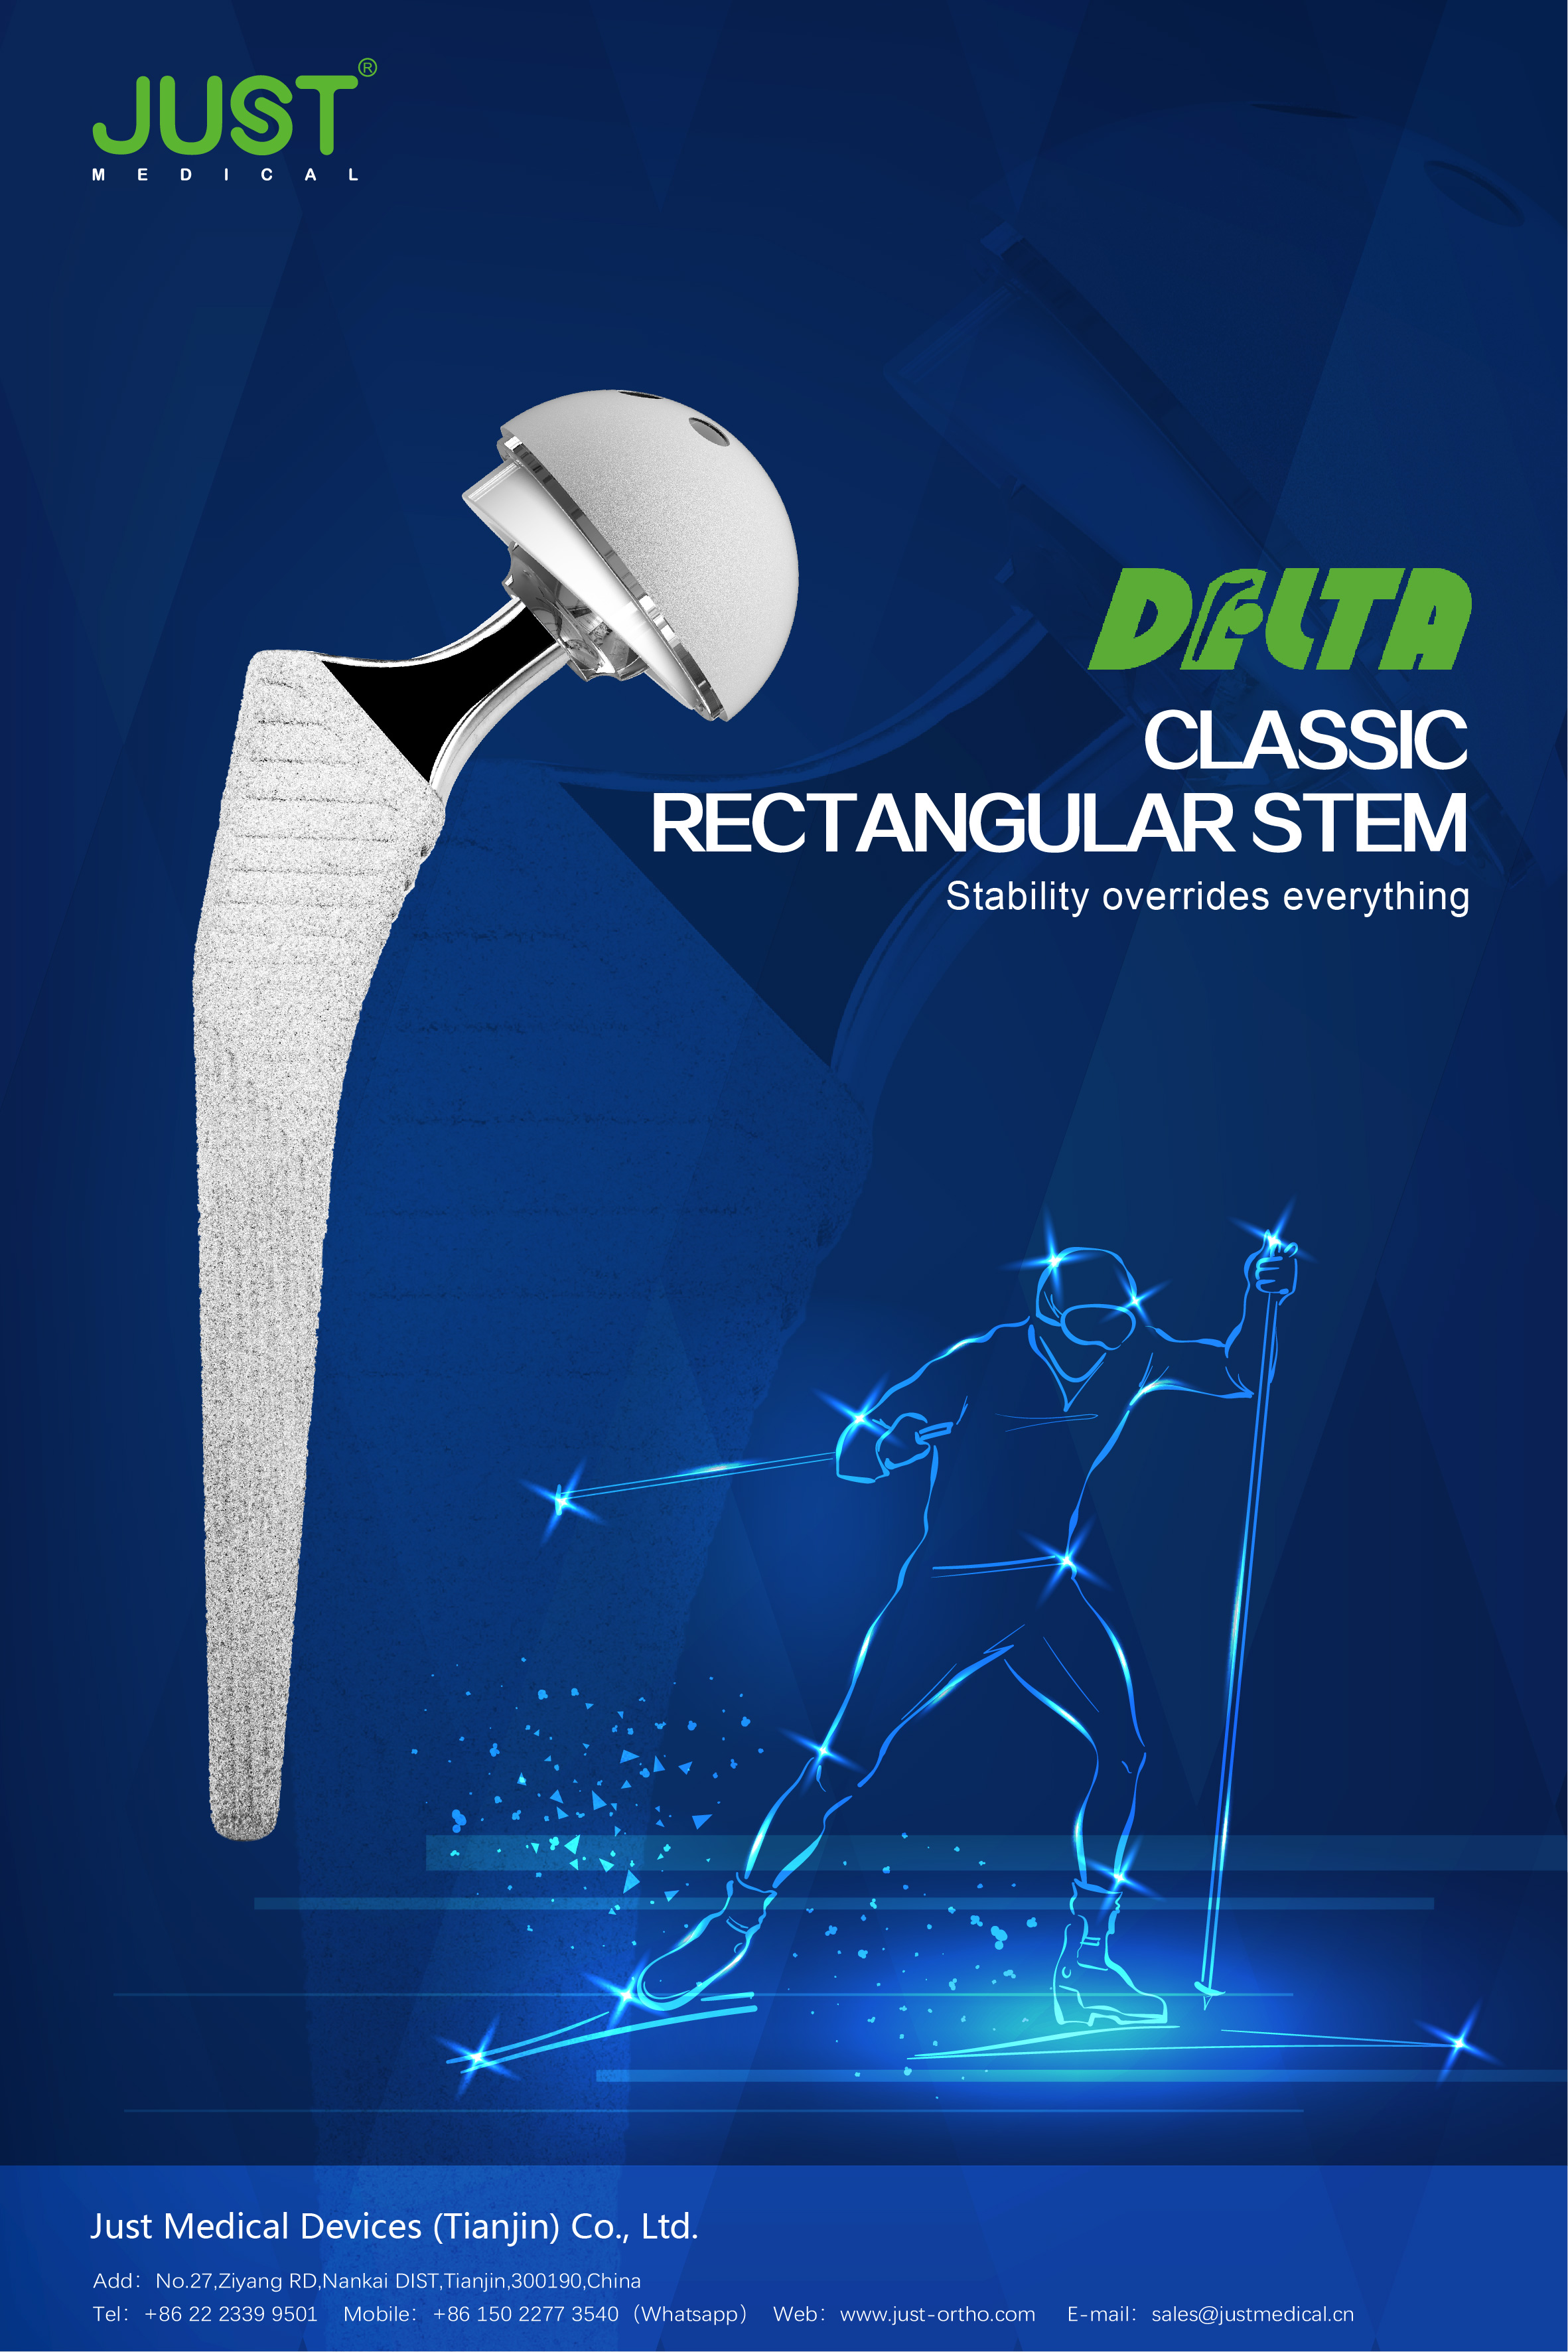 New product launched---Delta classic Femoral stem